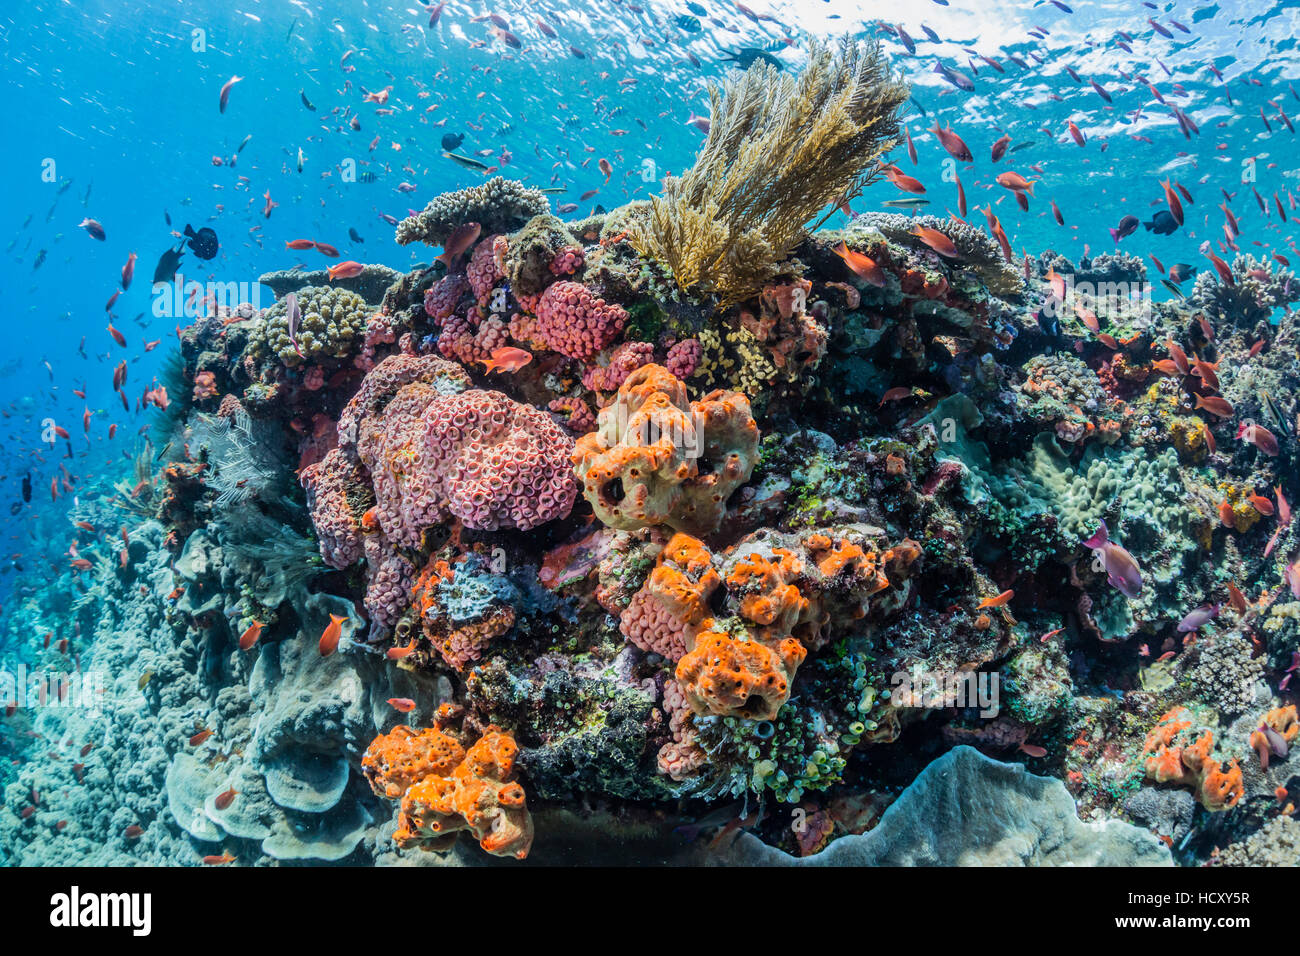 Profusion of hard and soft corals as well as reef fish underwater at Batu Bolong, Komodo National Park, Flores Sea, Indonesia Stock Photo